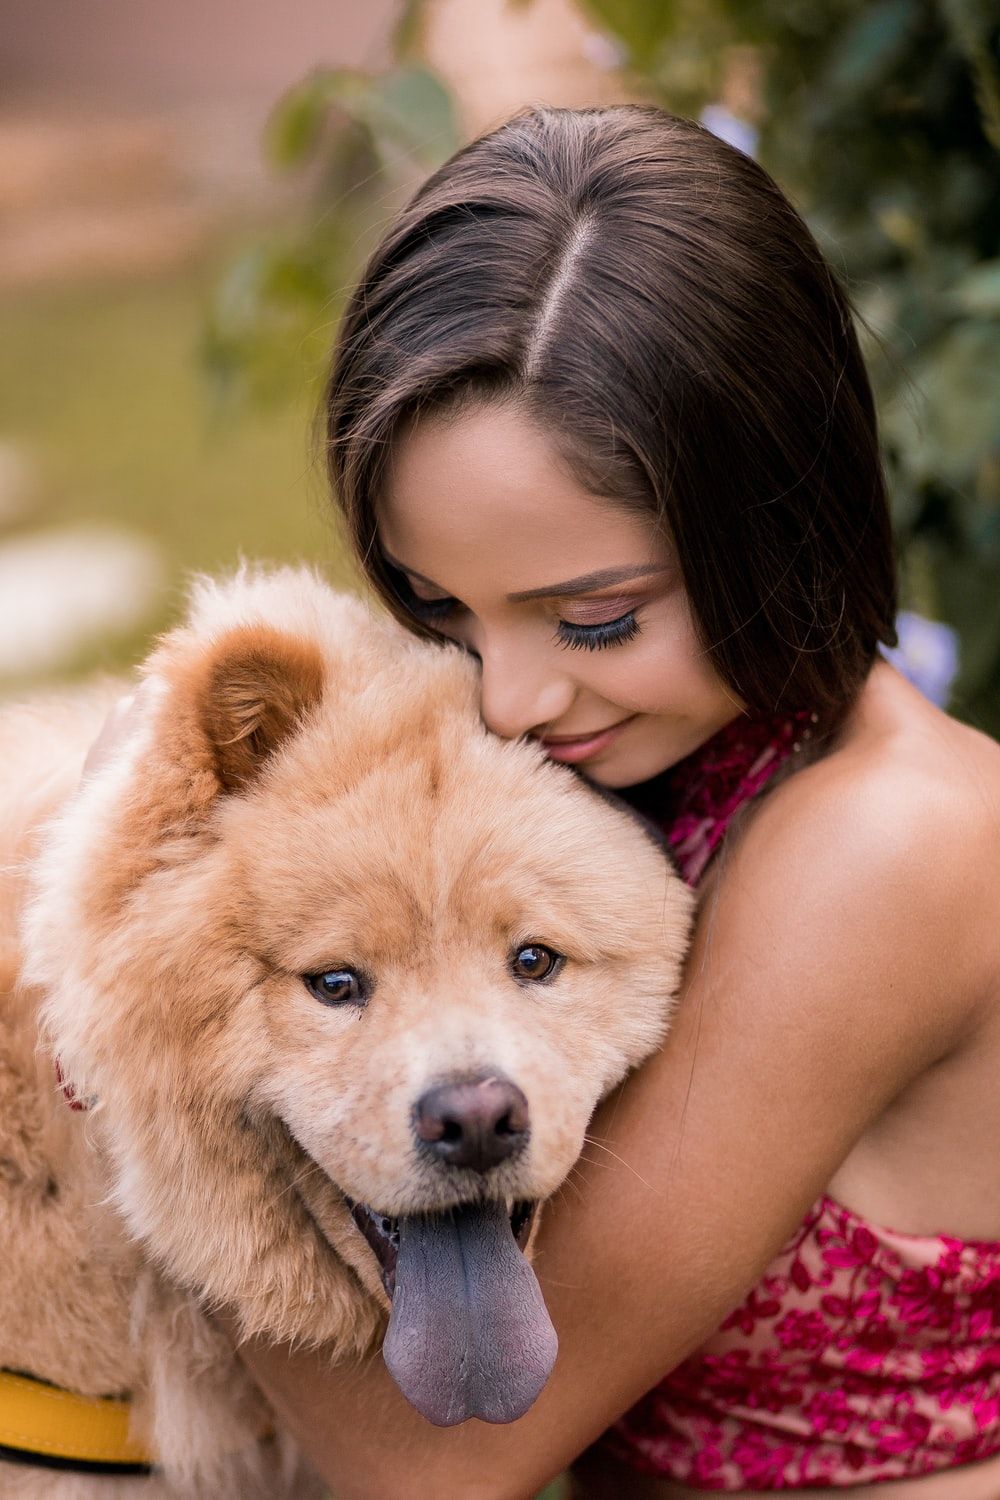 Girl With Dog Picture [HD]. Download Free Image